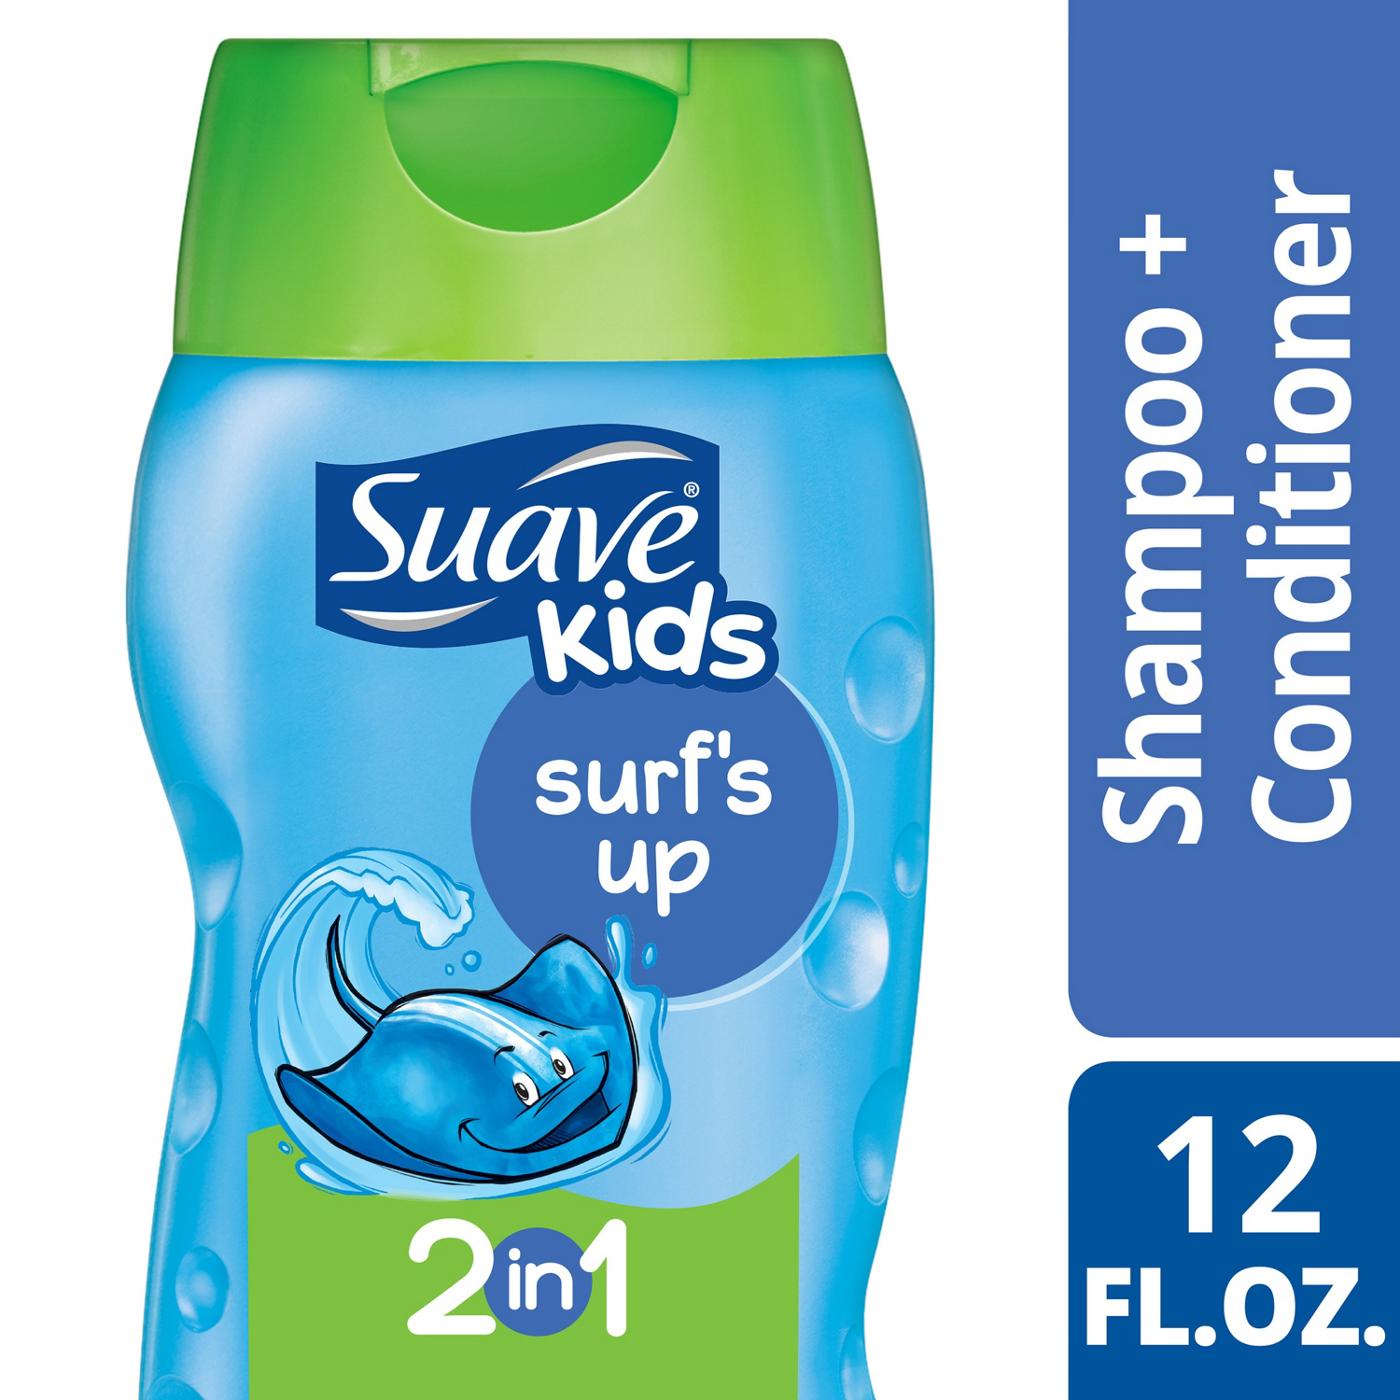 Suave Kids Surf's Up 2 in 1 Shampoo and Conditioner; image 3 of 3